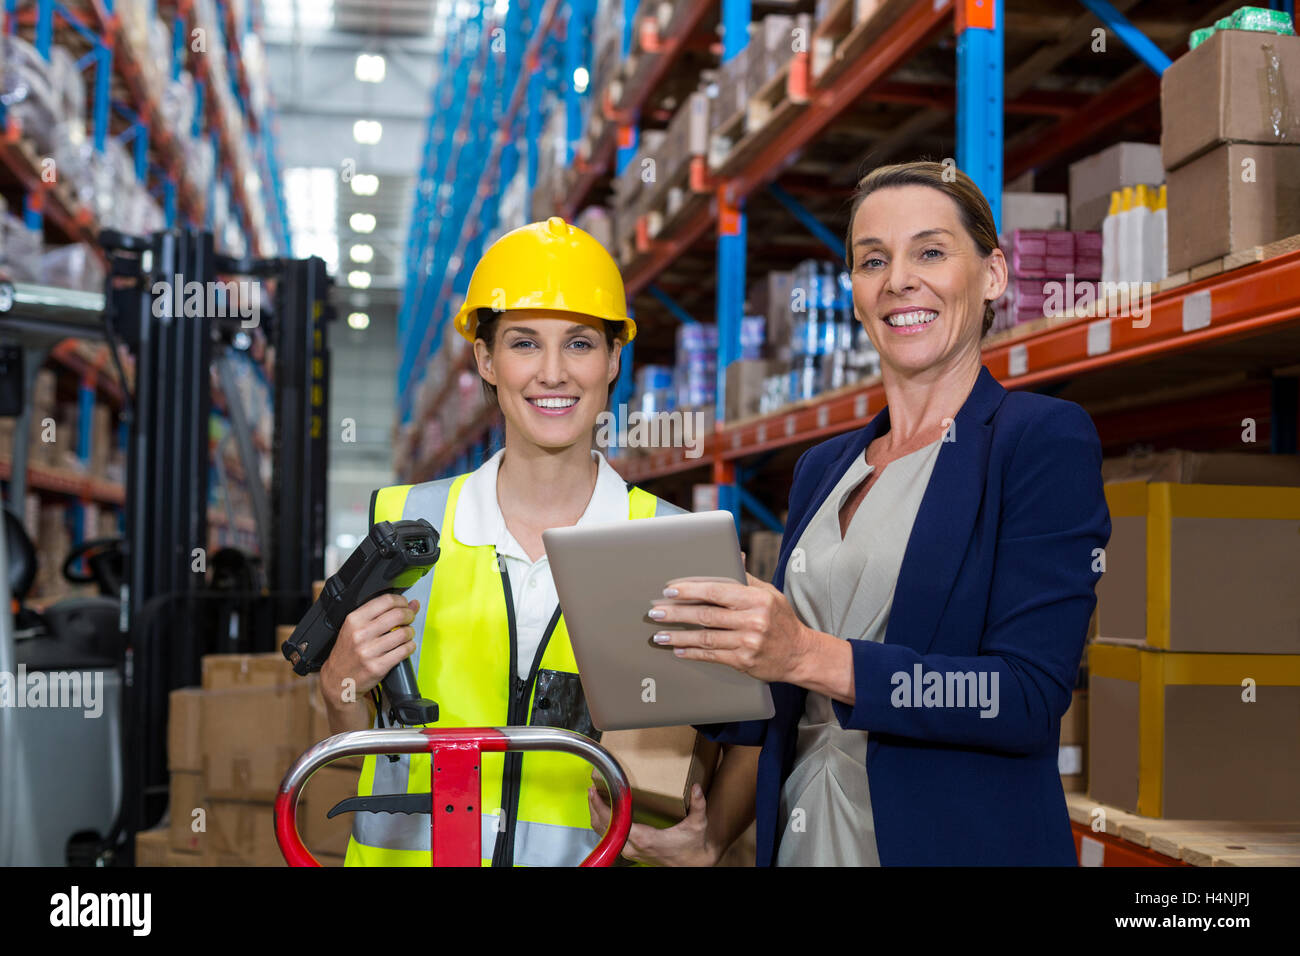 Warehouse manager and female worker smiling while holding digital tablet Stock Photo